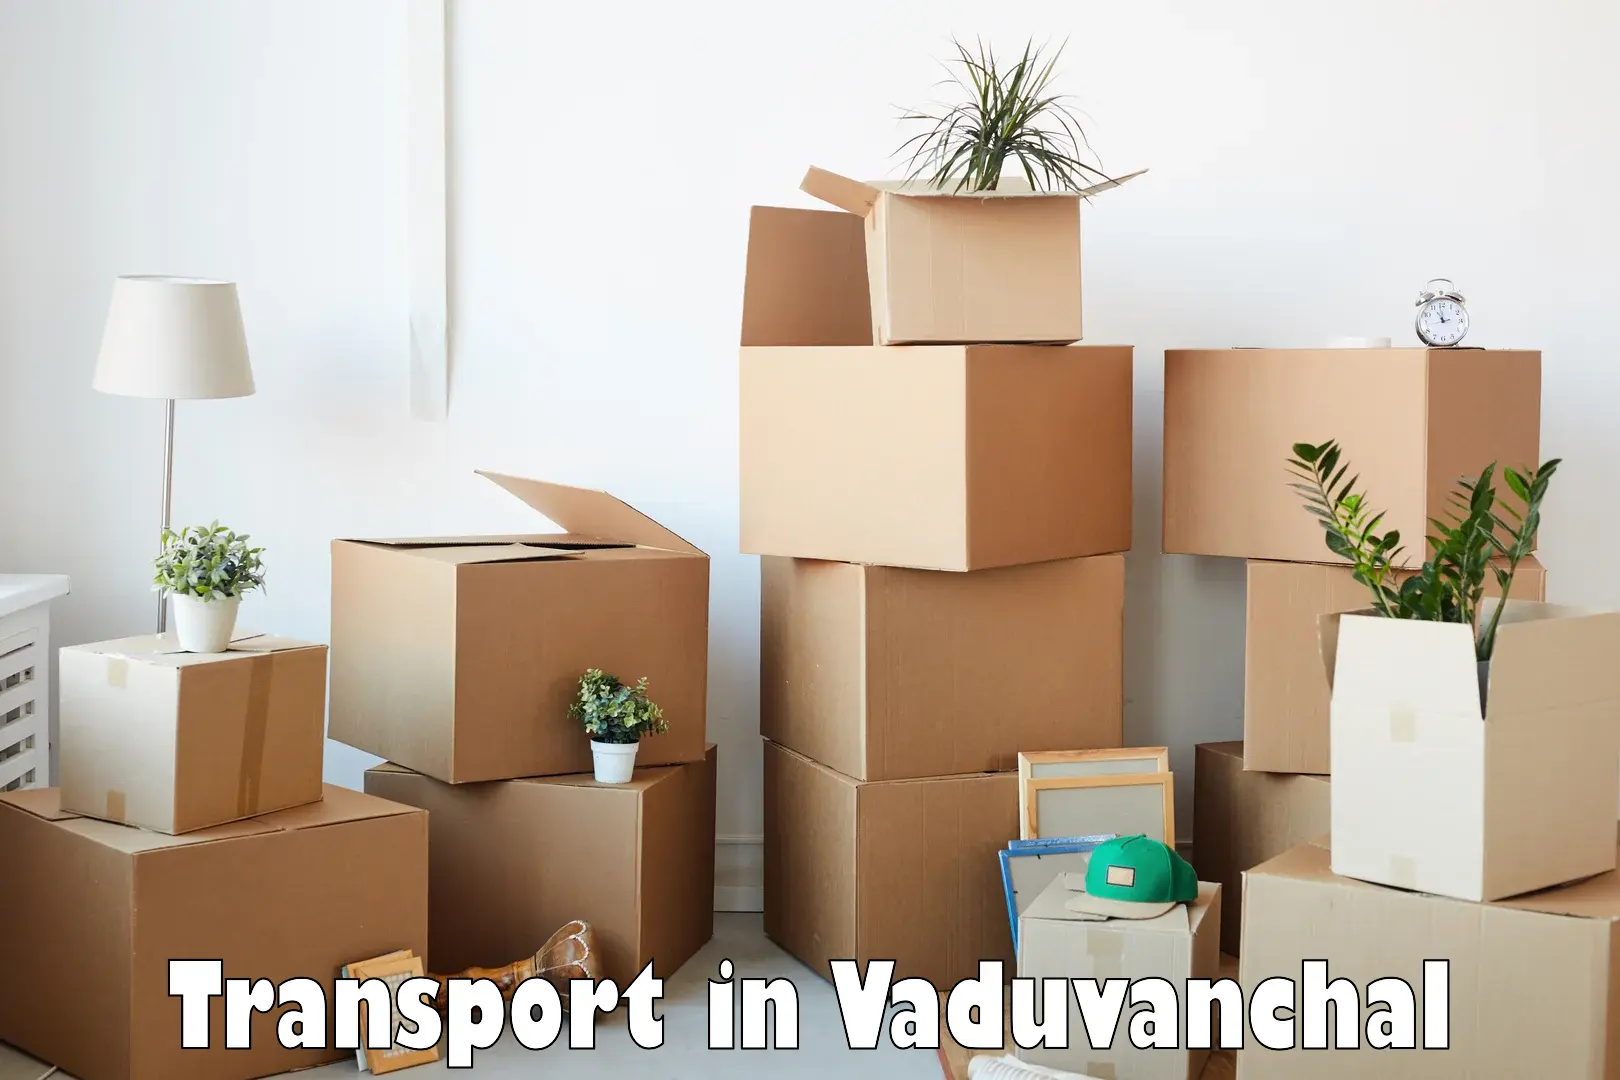 Domestic goods transportation services in Vaduvanchal